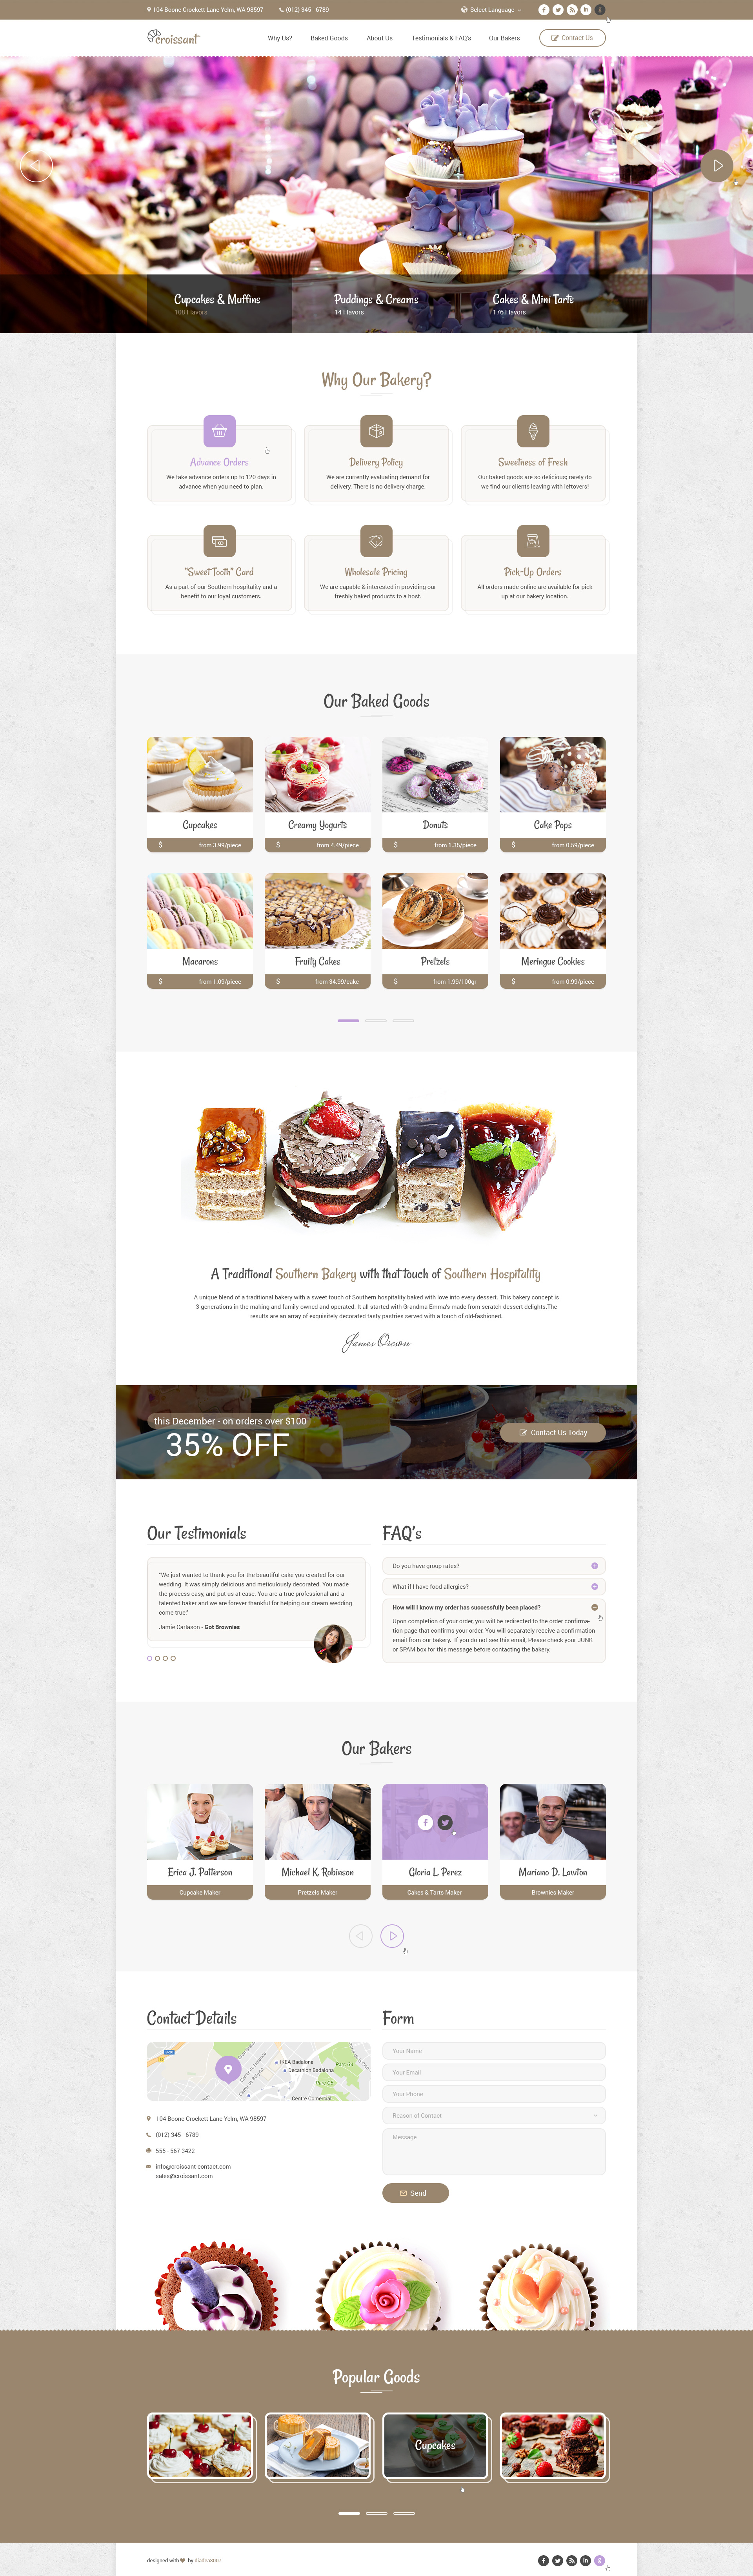 Croissant - Creative Bakery and Pastry Business One Page PSD Template